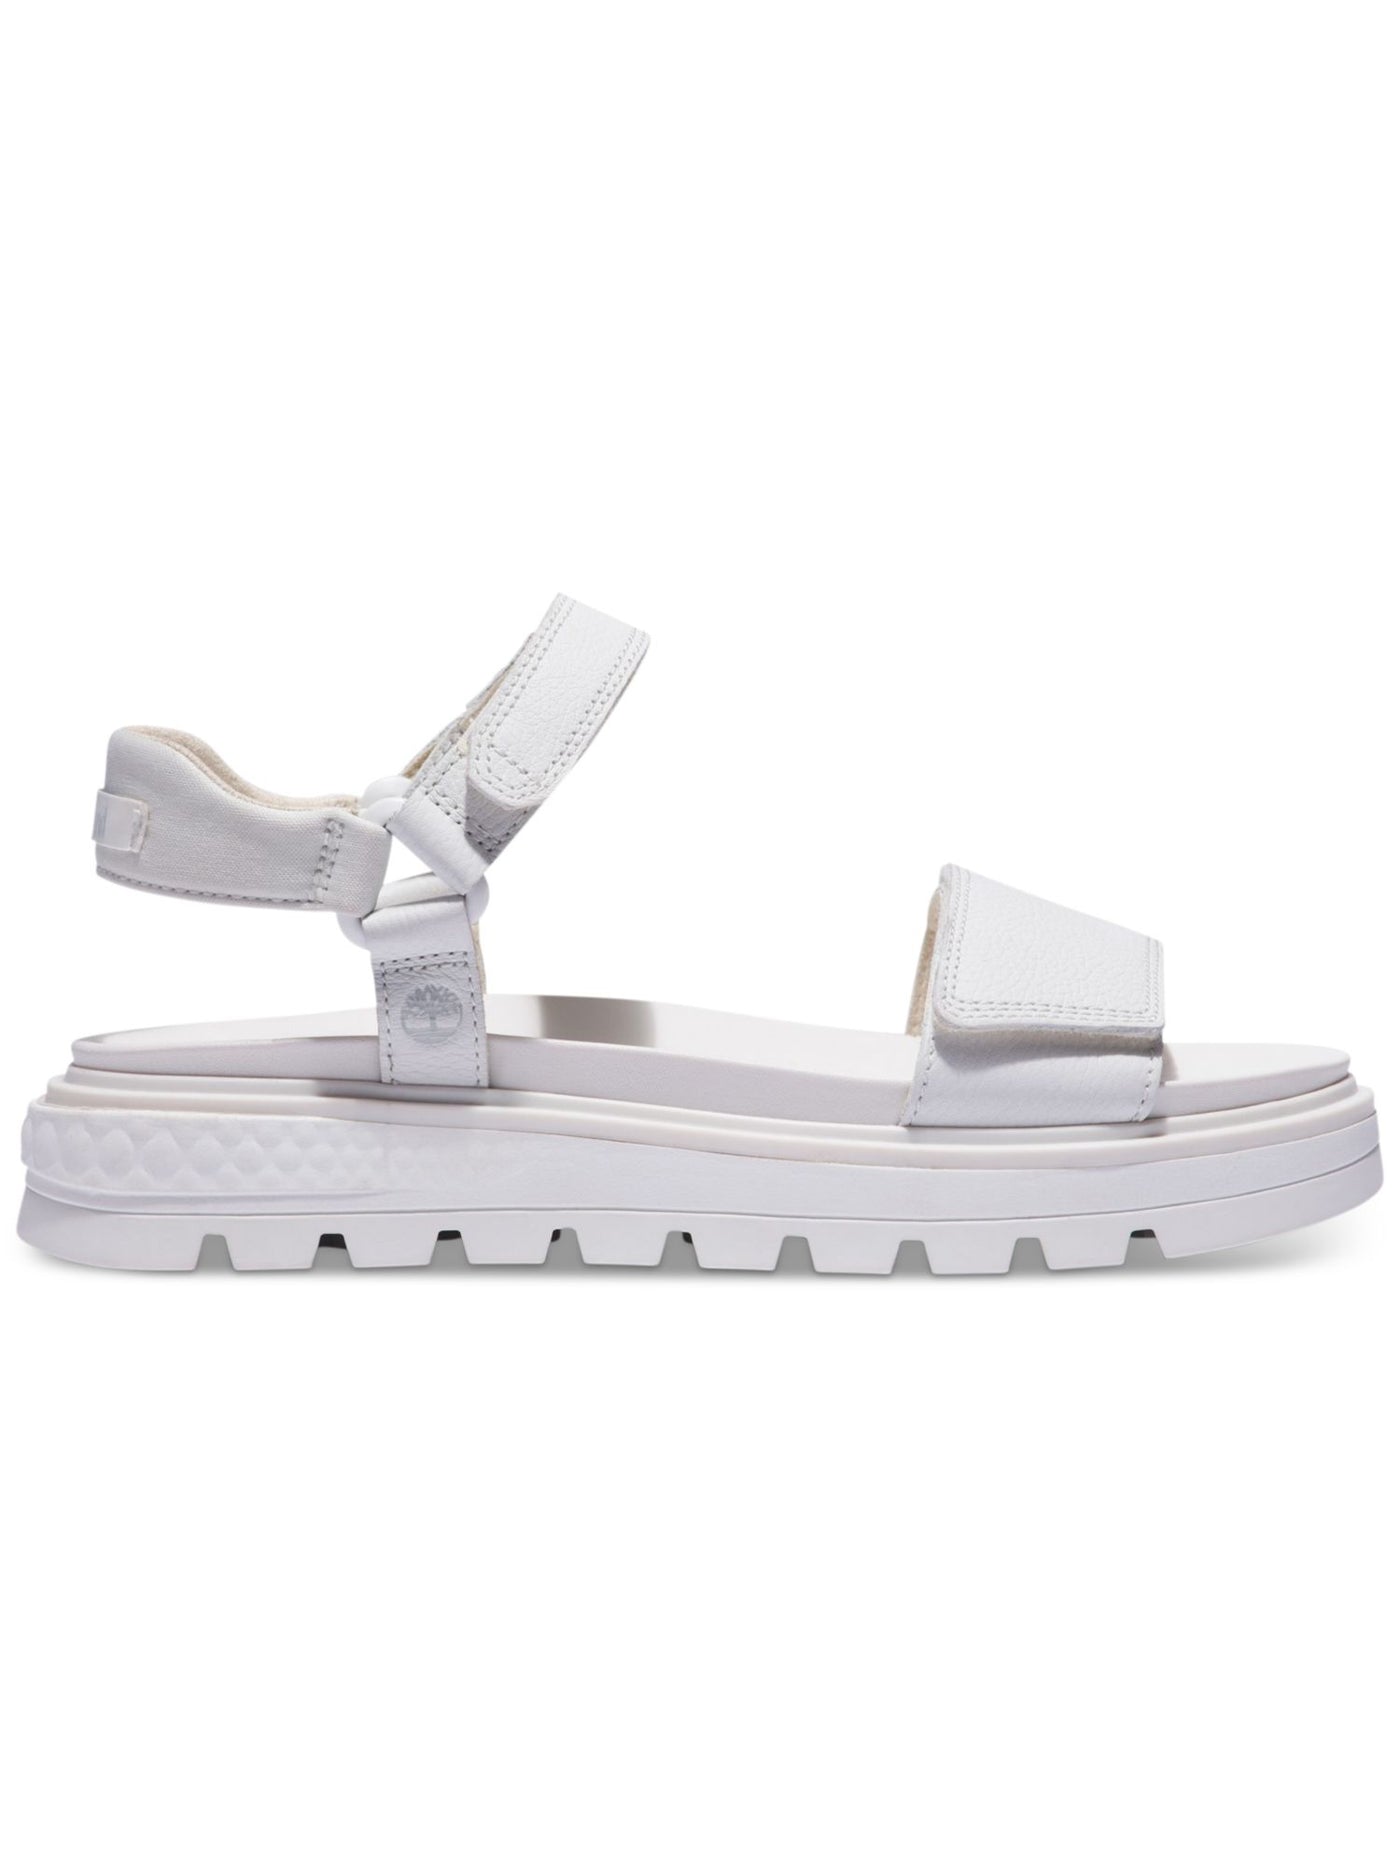 TIMBERLAND Womens White Comfort Ankle Strap Ray City Round Toe Wedge Leather Sandals Shoes 10